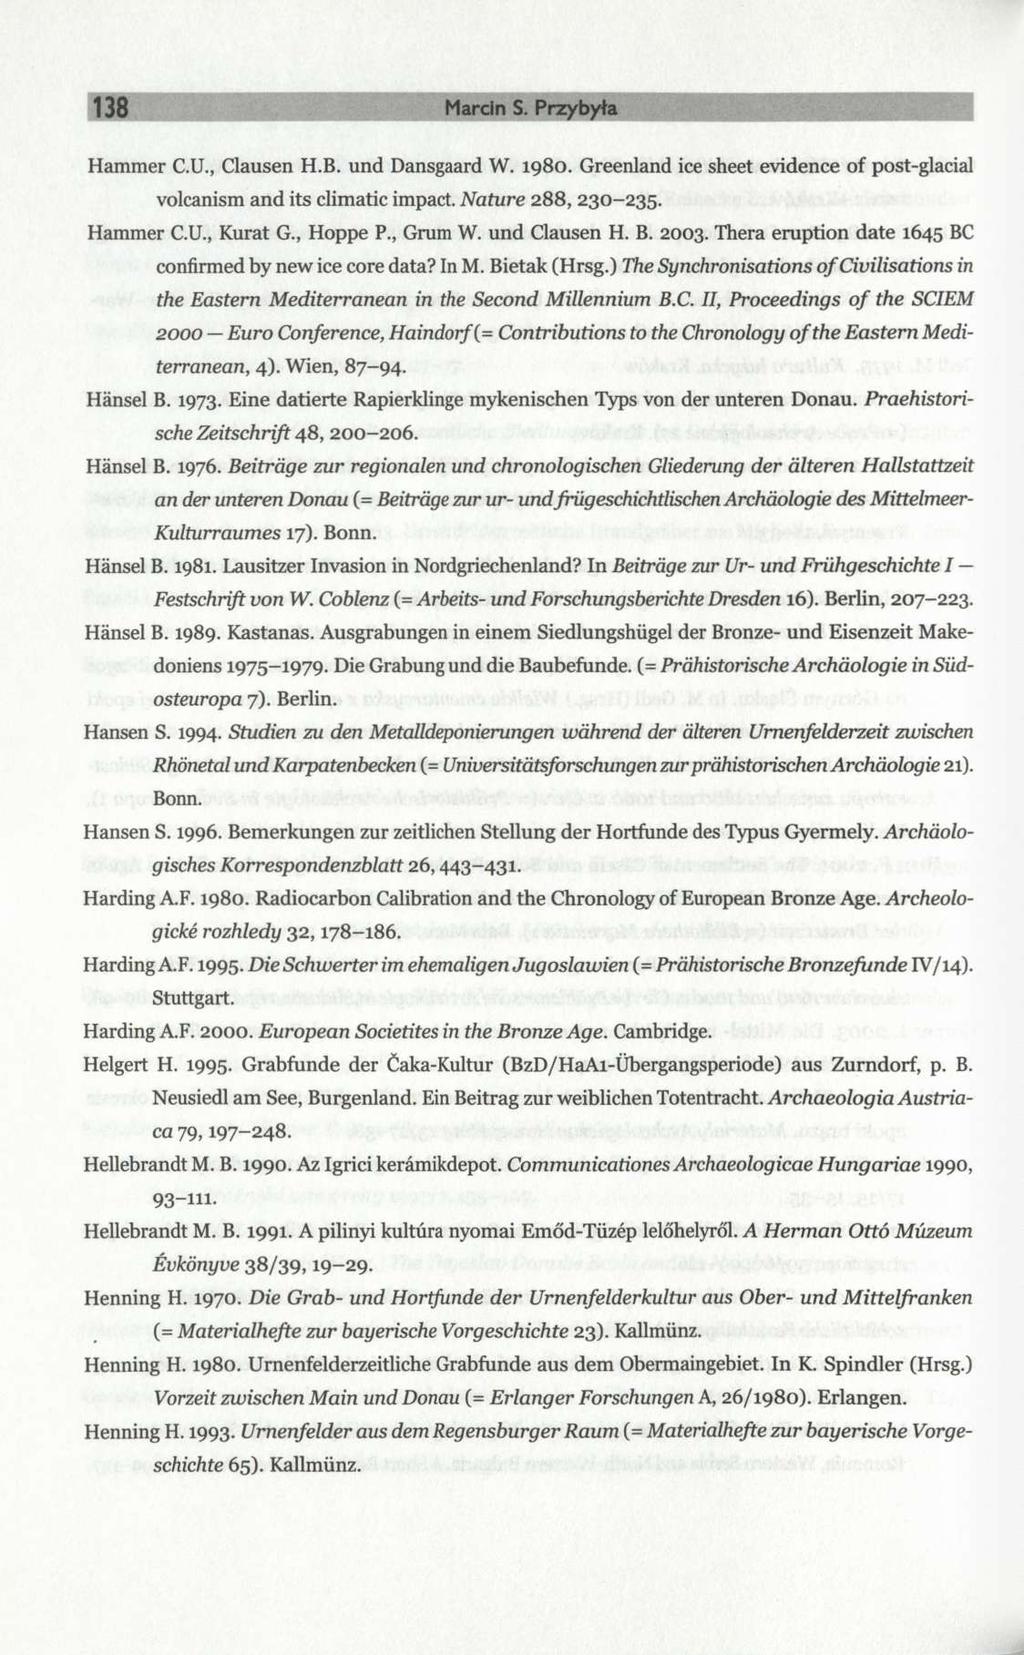 138 Marcin S. Przybyła Hammer C.U., Clausen H.B. und Dansgaard W. 1980. Greenland ice sheet evidence of post-glacial volcanism and its climatic impact. Nature 288, 230-235. Hammer C.U., Kurat G.